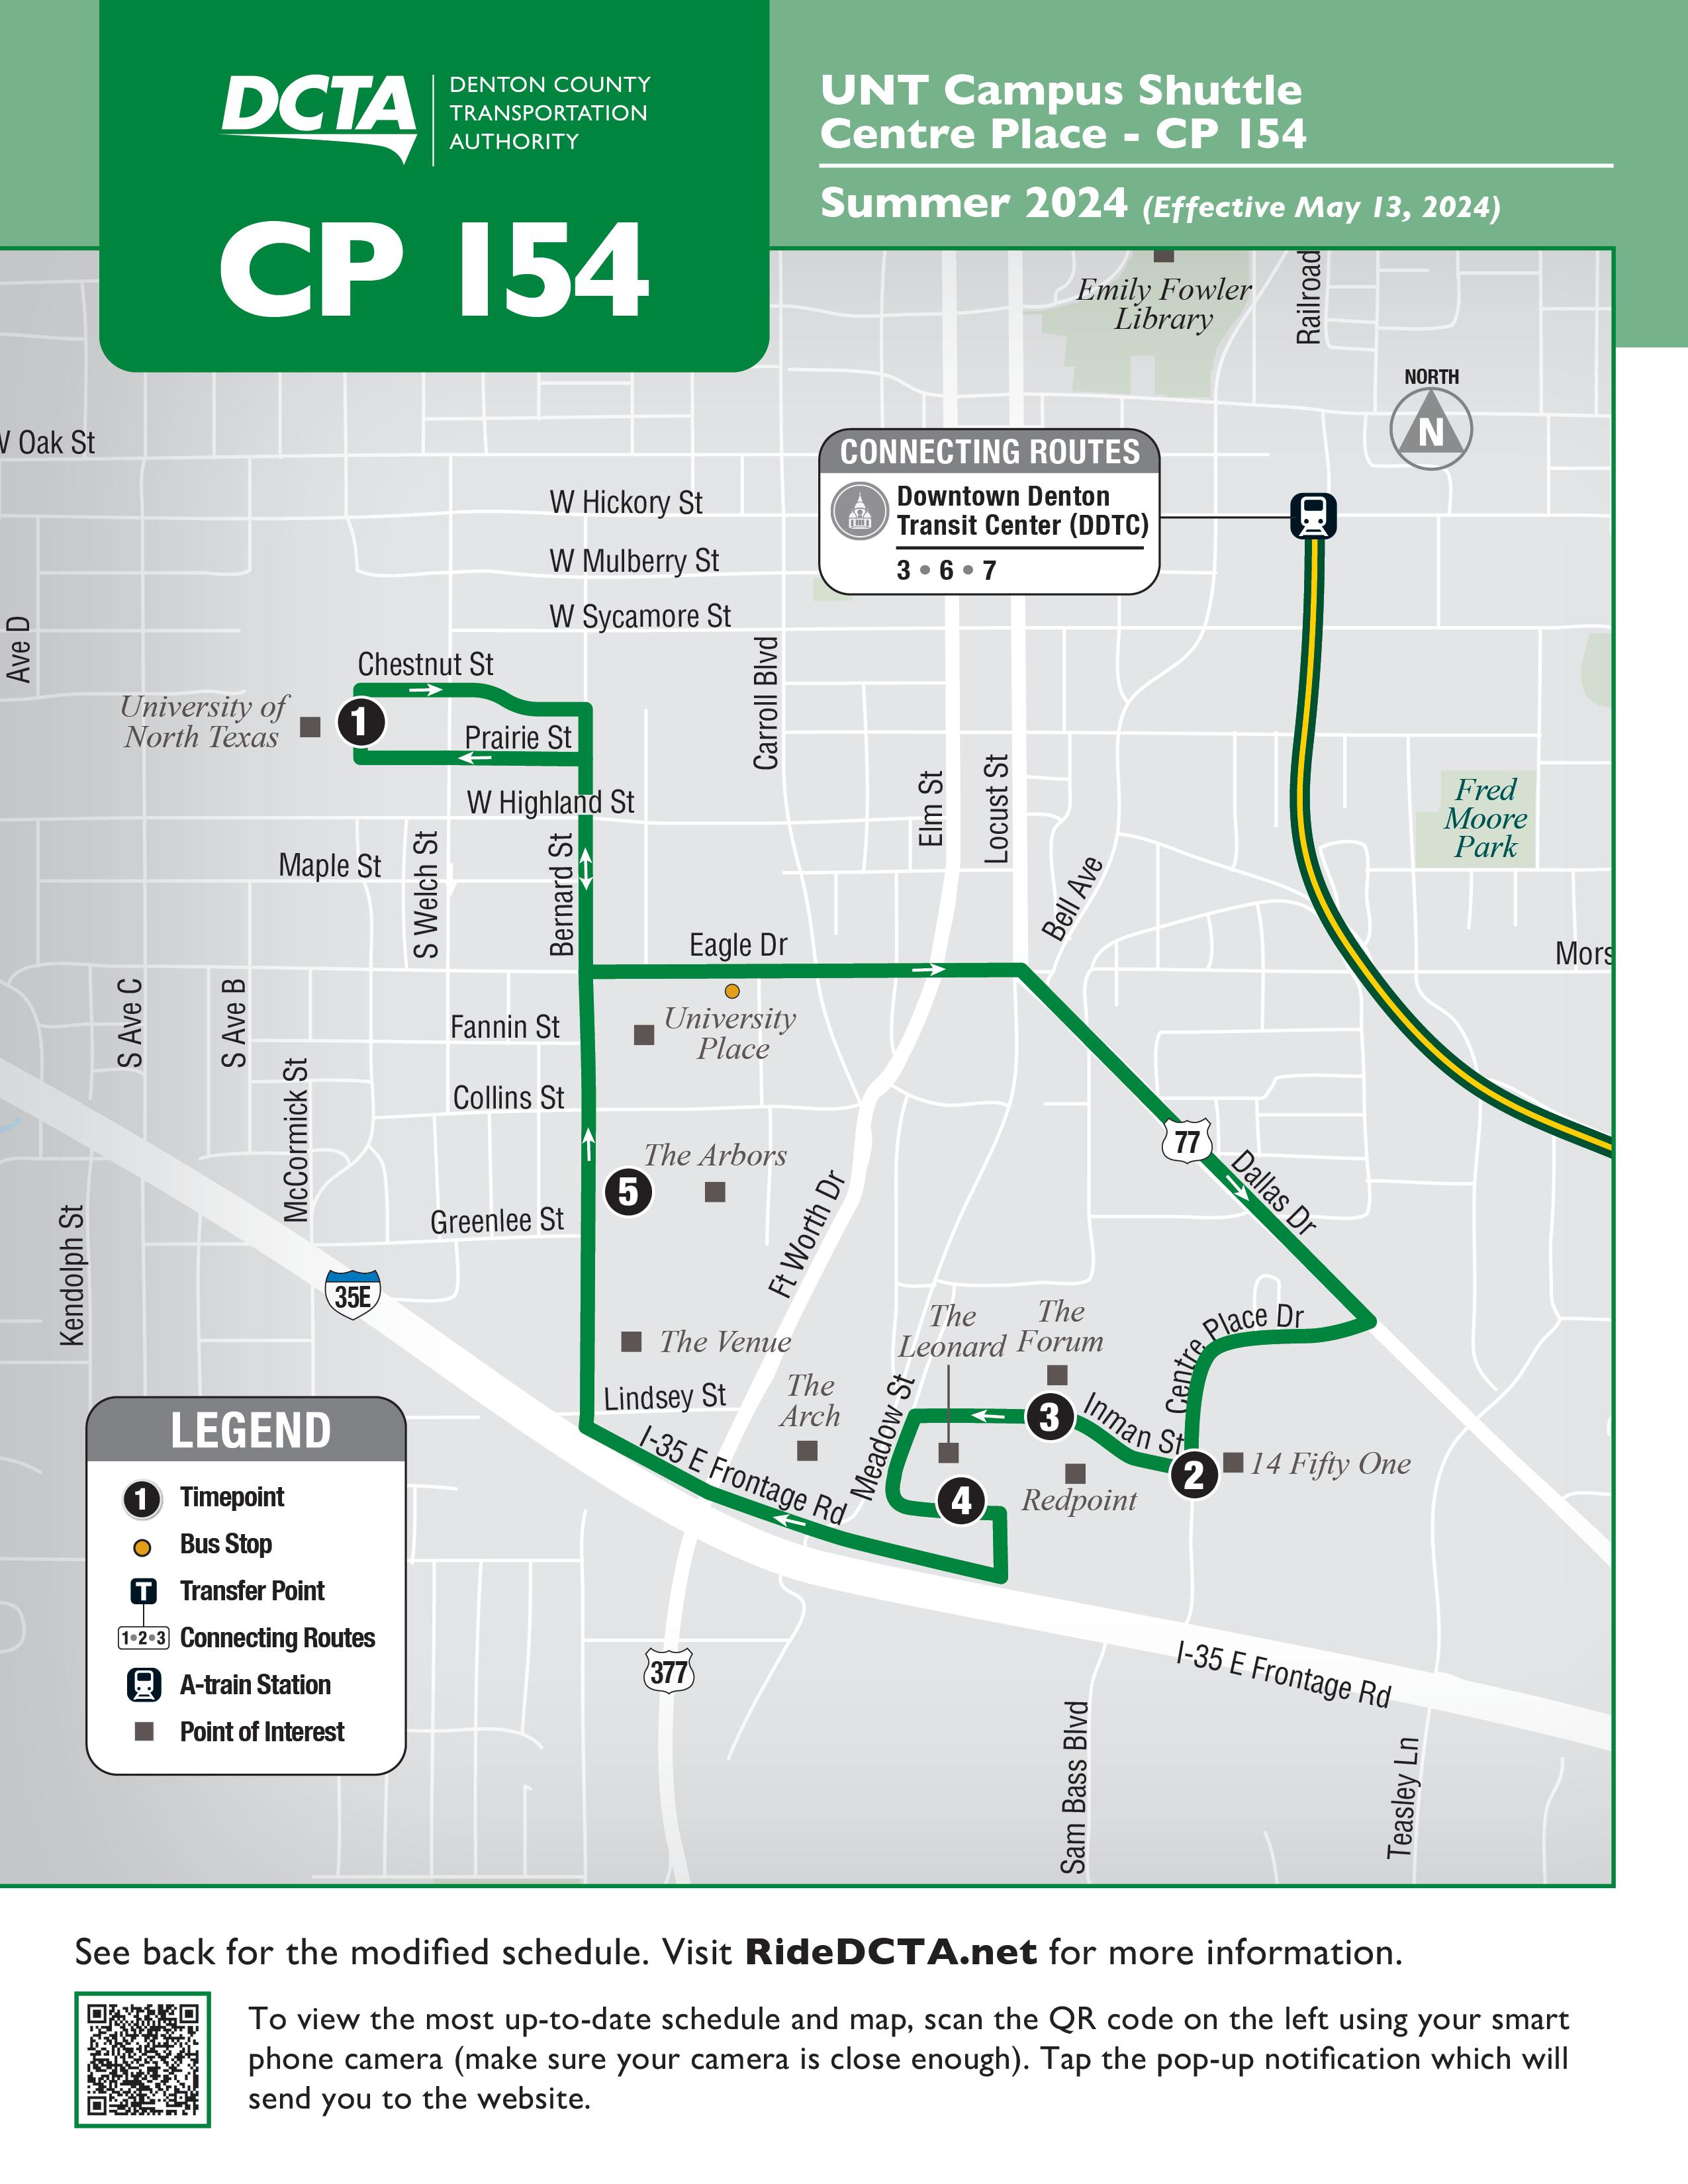 CP 154 Summer Route FY24 Map